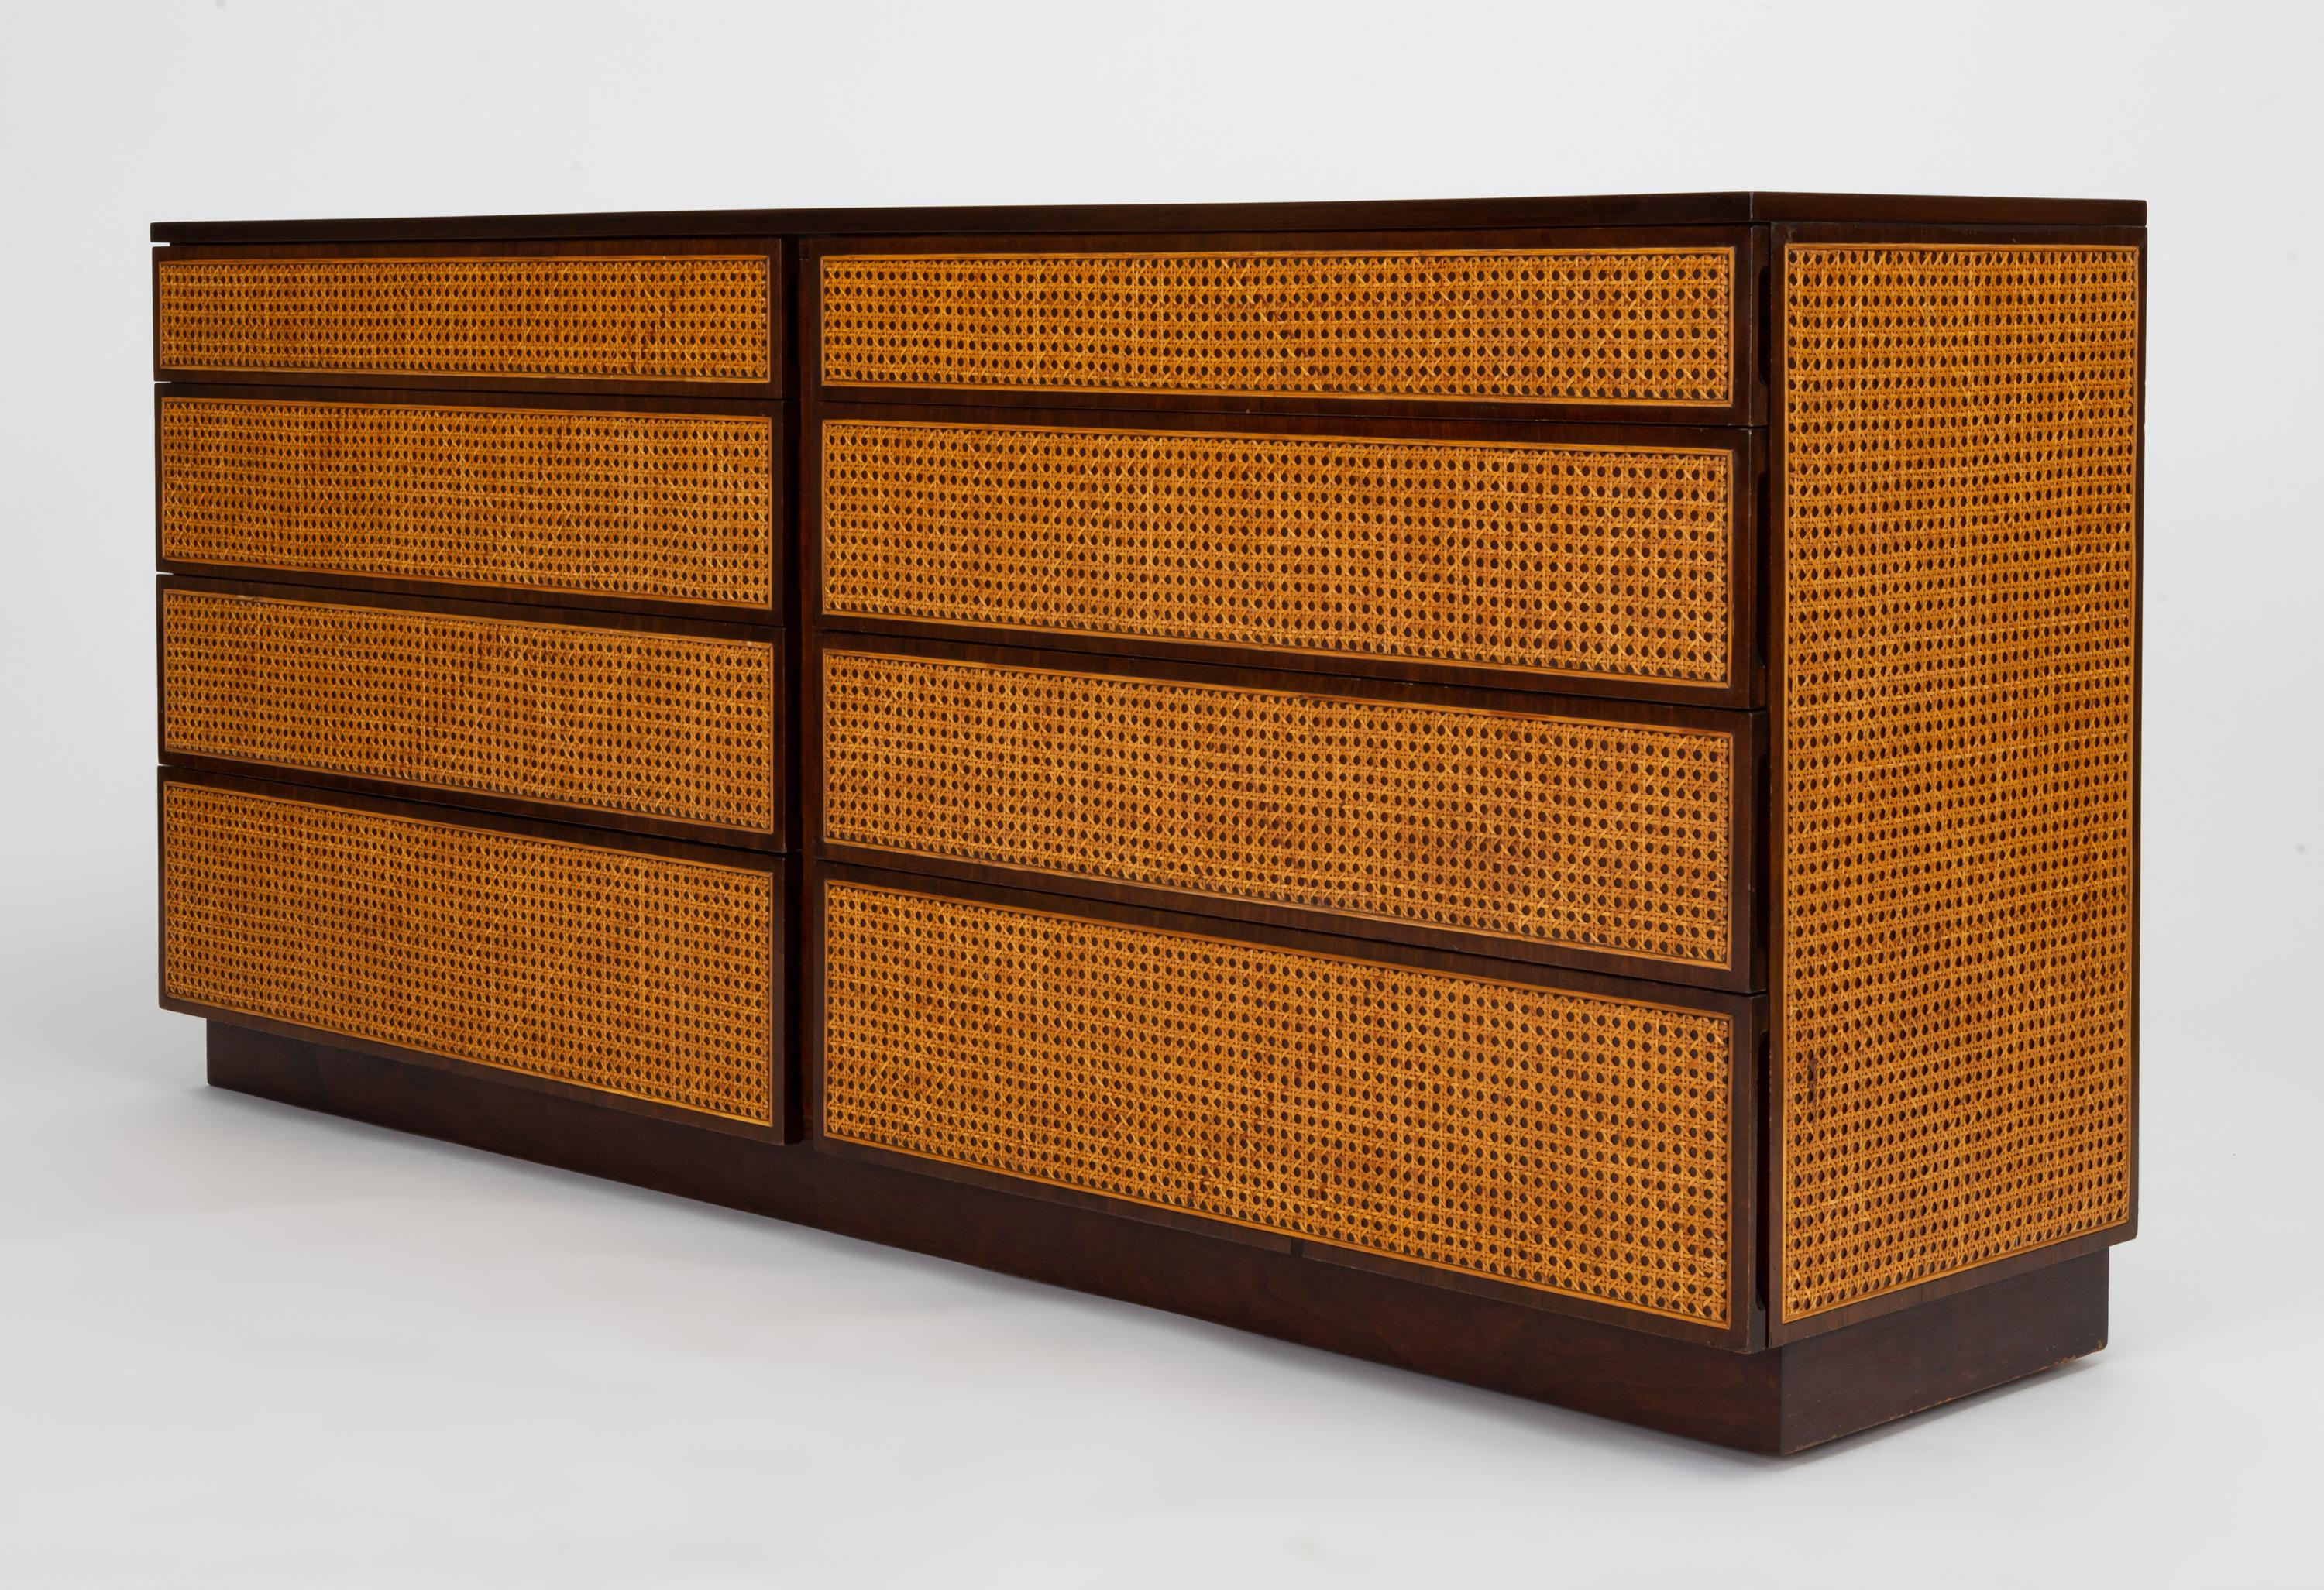 American Eight Drawer Dresser with Woven Cane Paneling from Directional Custom Collection